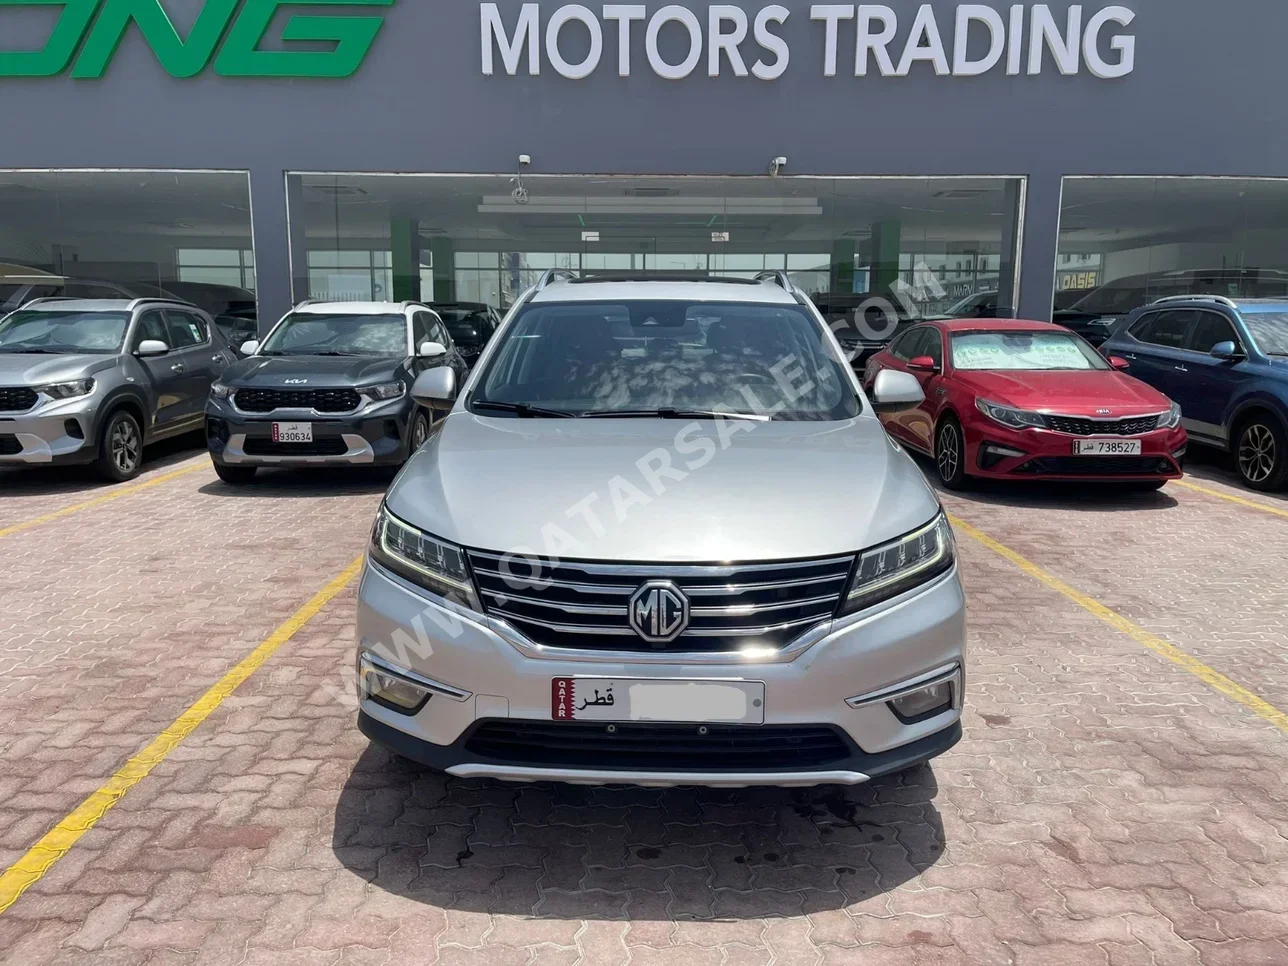 MG  RX5  2020  Automatic  89,000 Km  4 Cylinder  Front Wheel Drive (FWD)  SUV  Silver  With Warranty